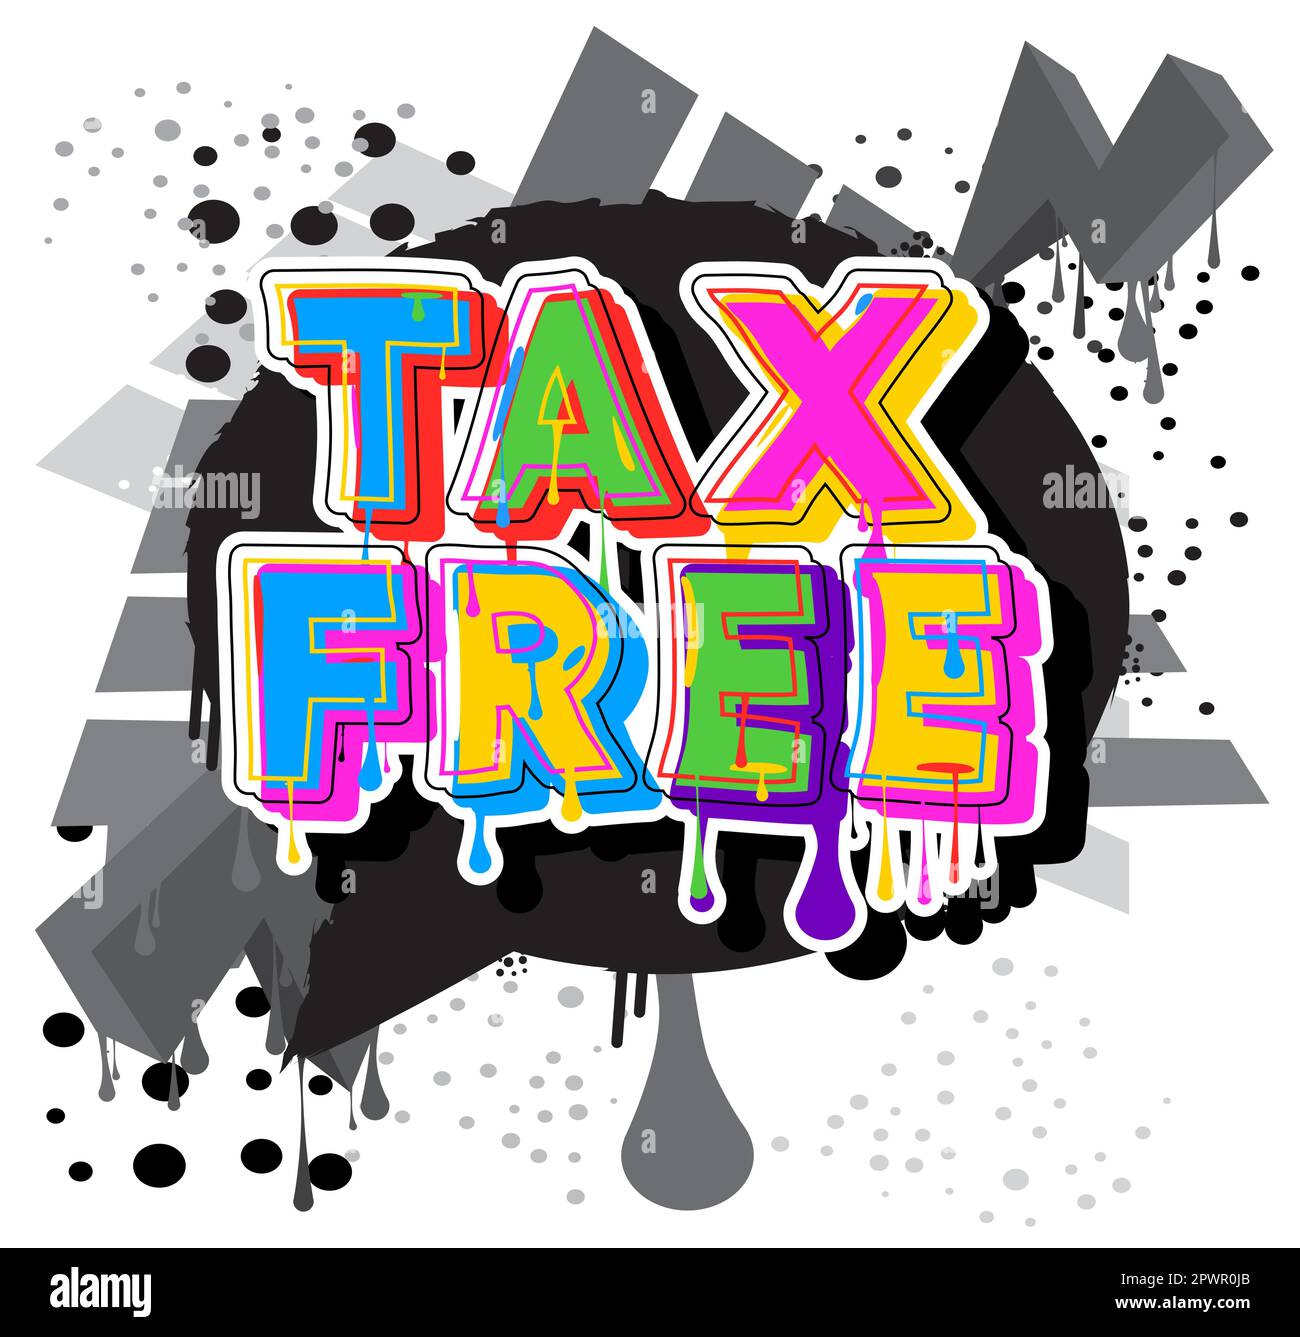 Tax Free. Graffiti tag. Abstract modern street art decoration performed in urban painting style. Stock Vector